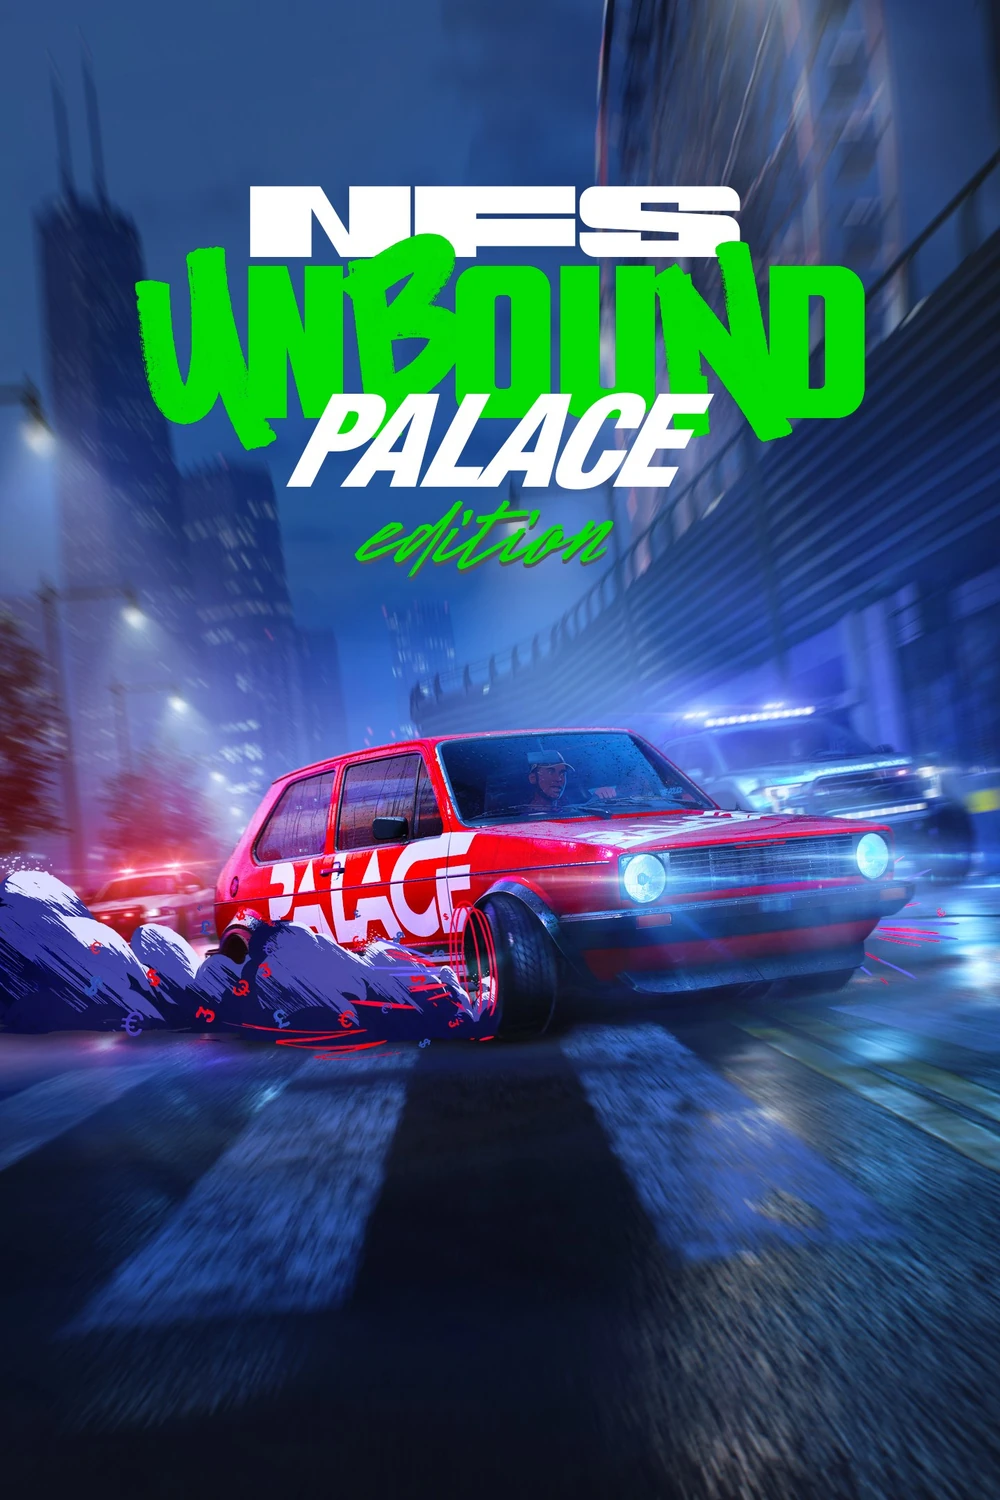 NFS - Need for Speed Unbound - Edycja Palace